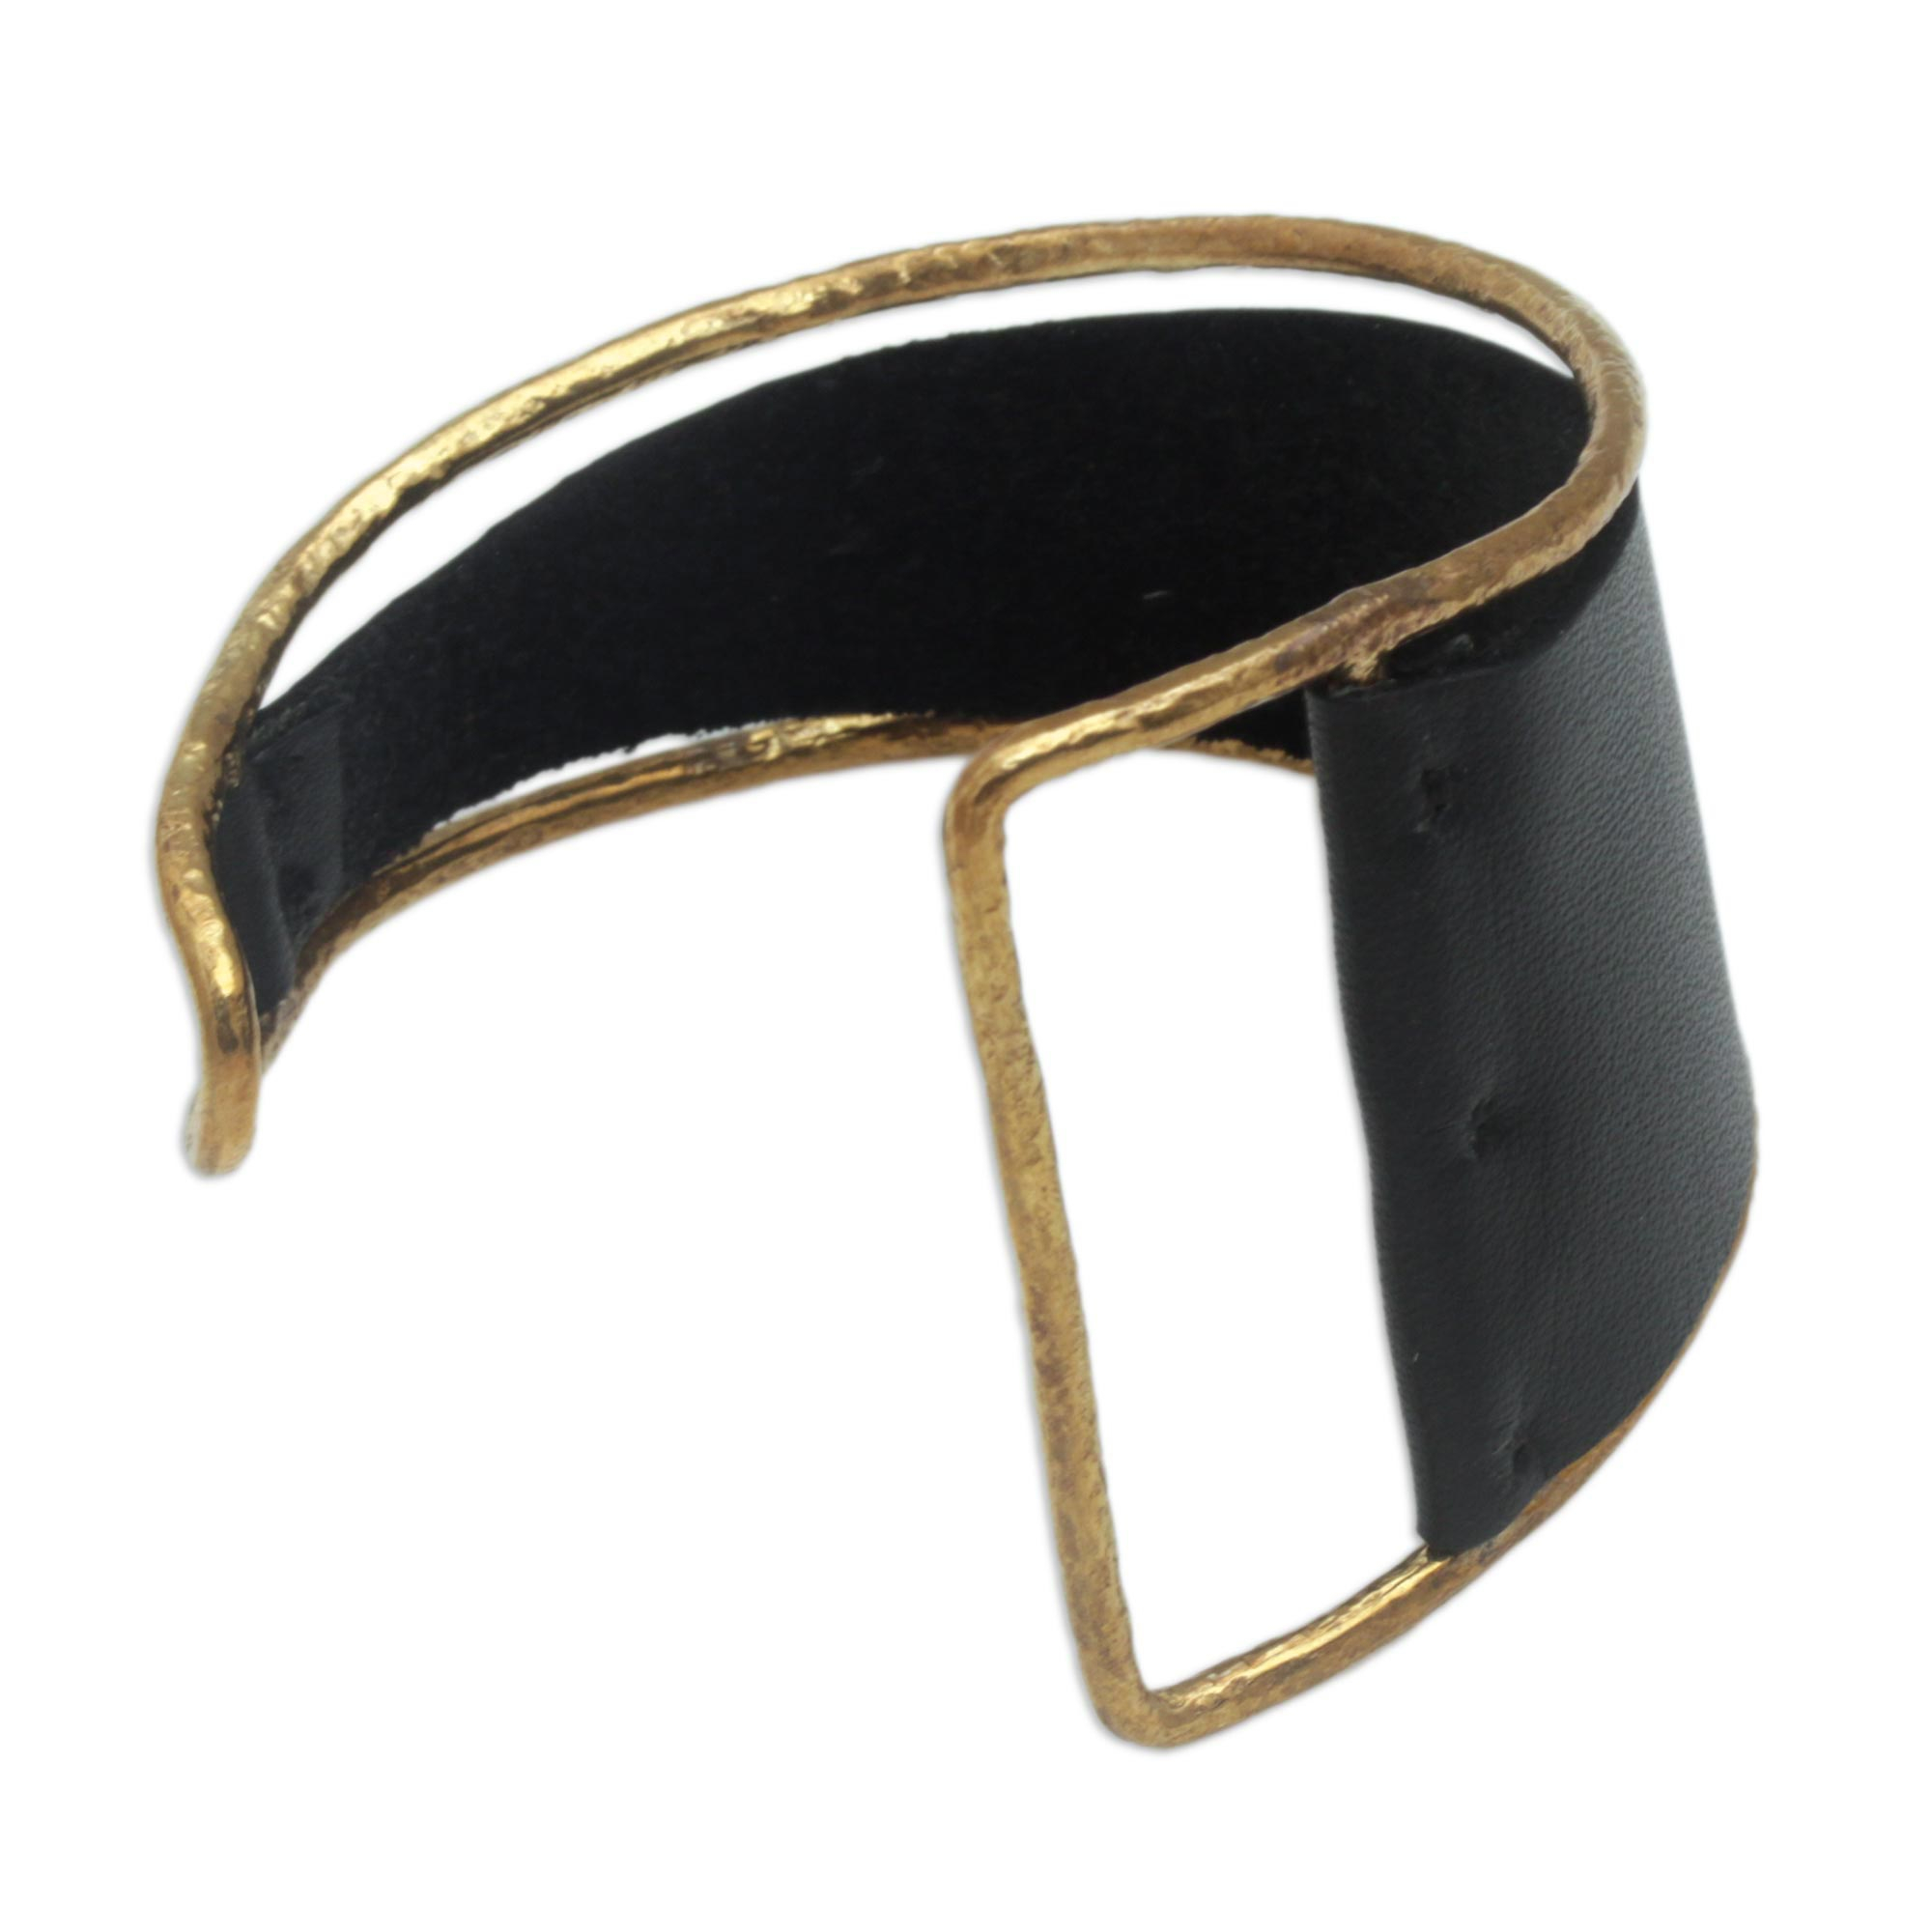 Golden Black Leather and Brass Cuff Bracelet from Bali - Golden Black ...